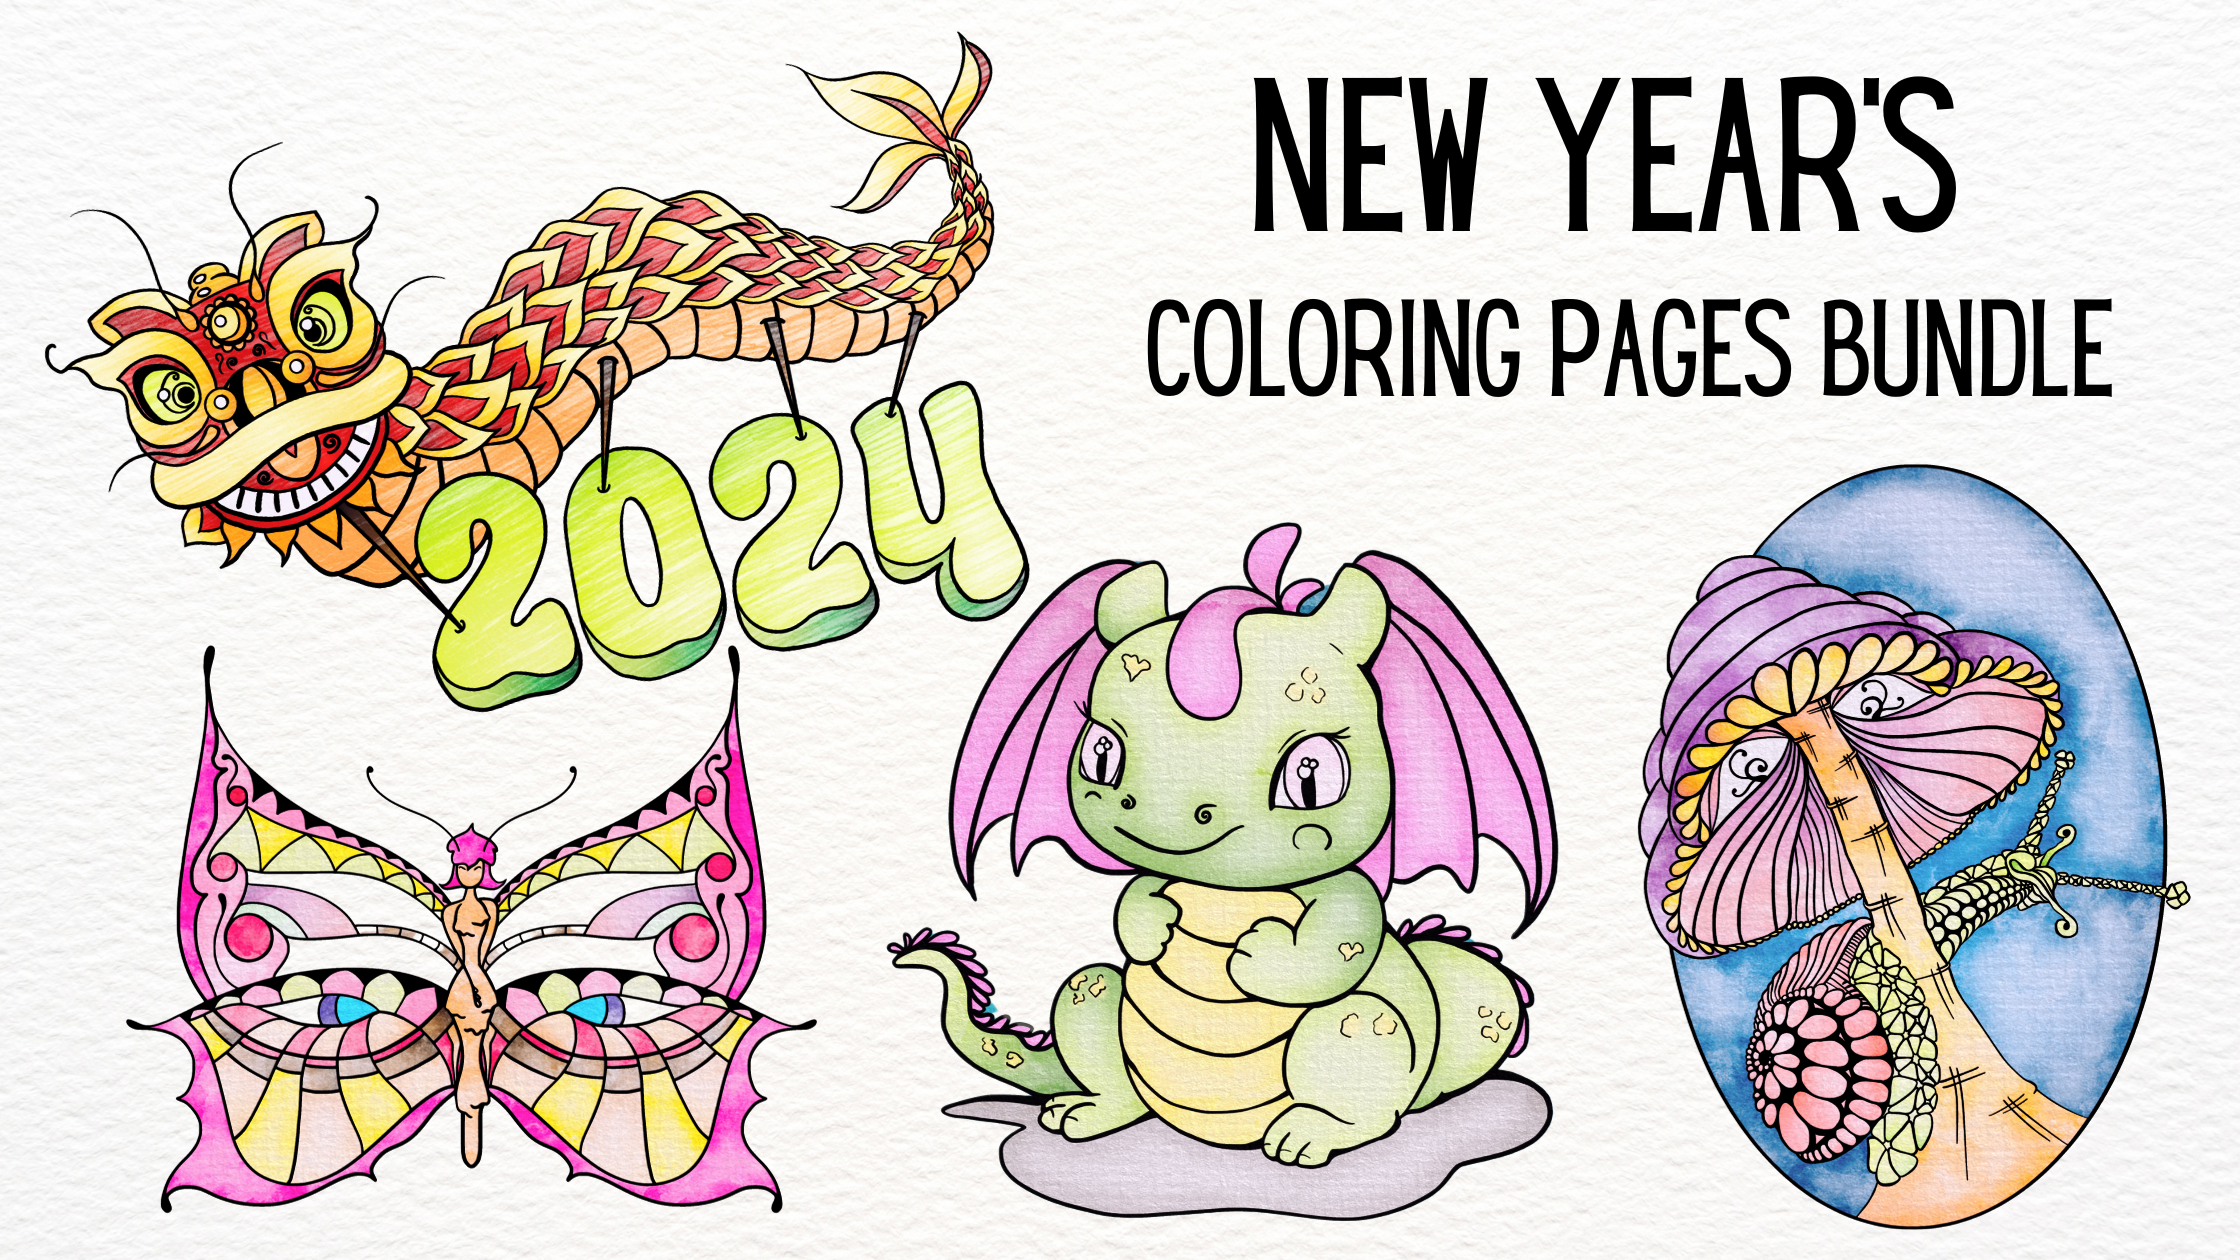 New Year’s Coloring Pages Bundle